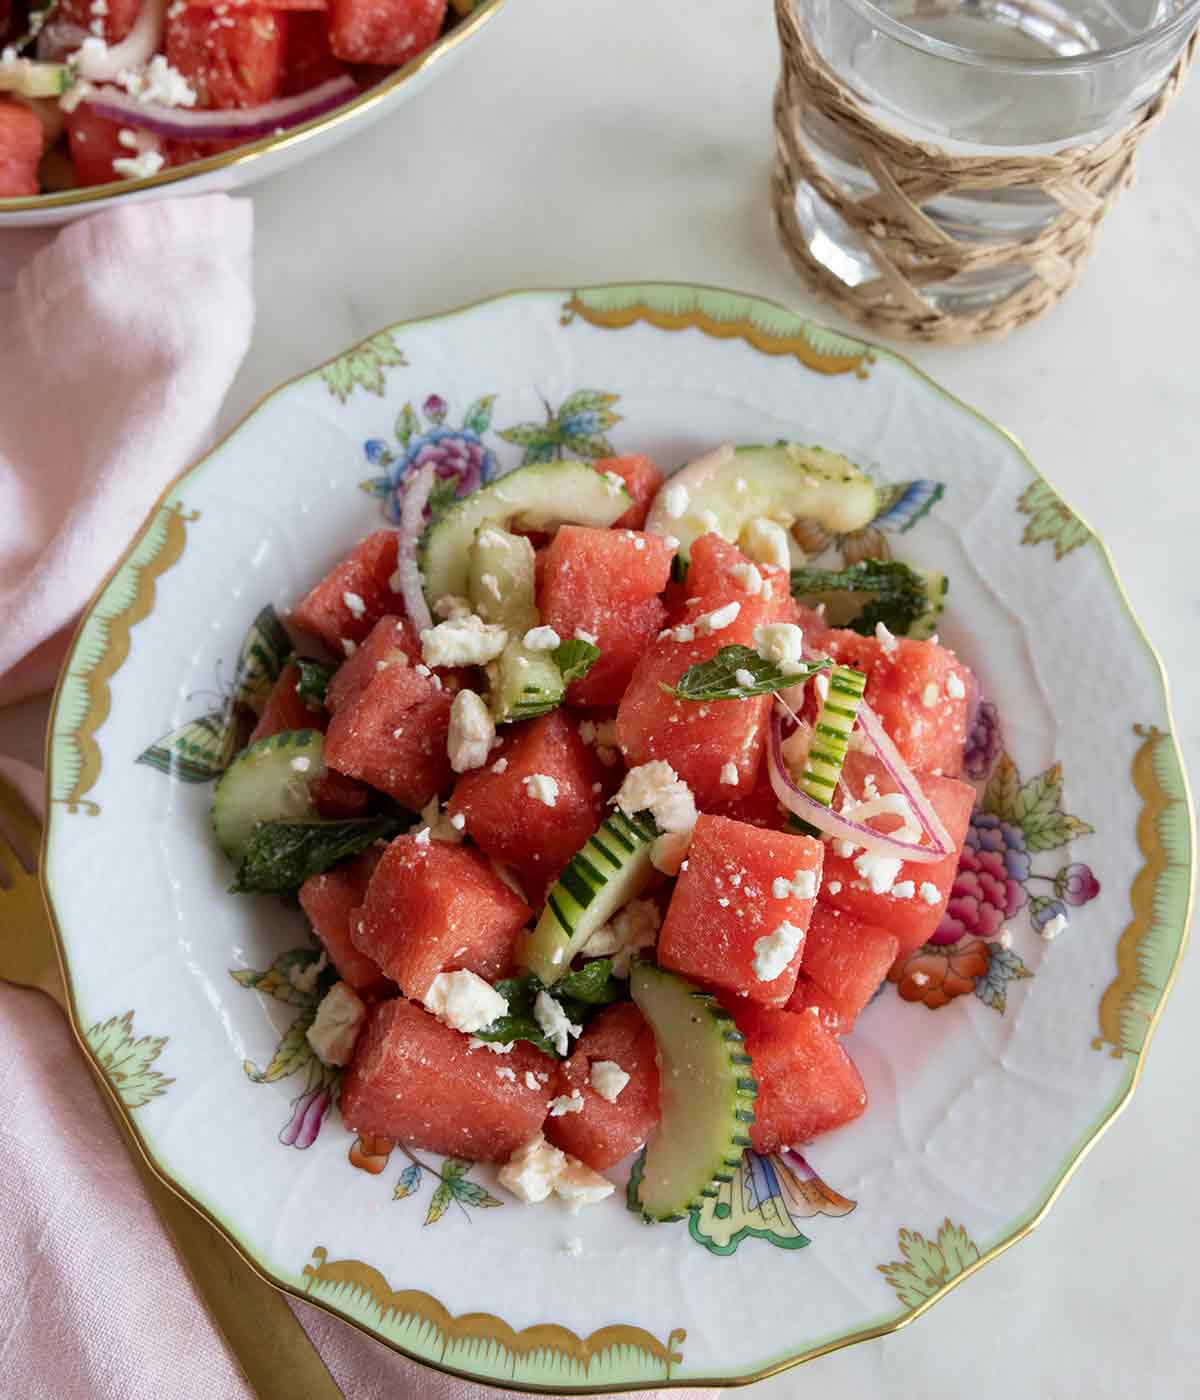 Overhead view of a plate of watermelon salad with a glass of water and a pink linen napkin beside it.